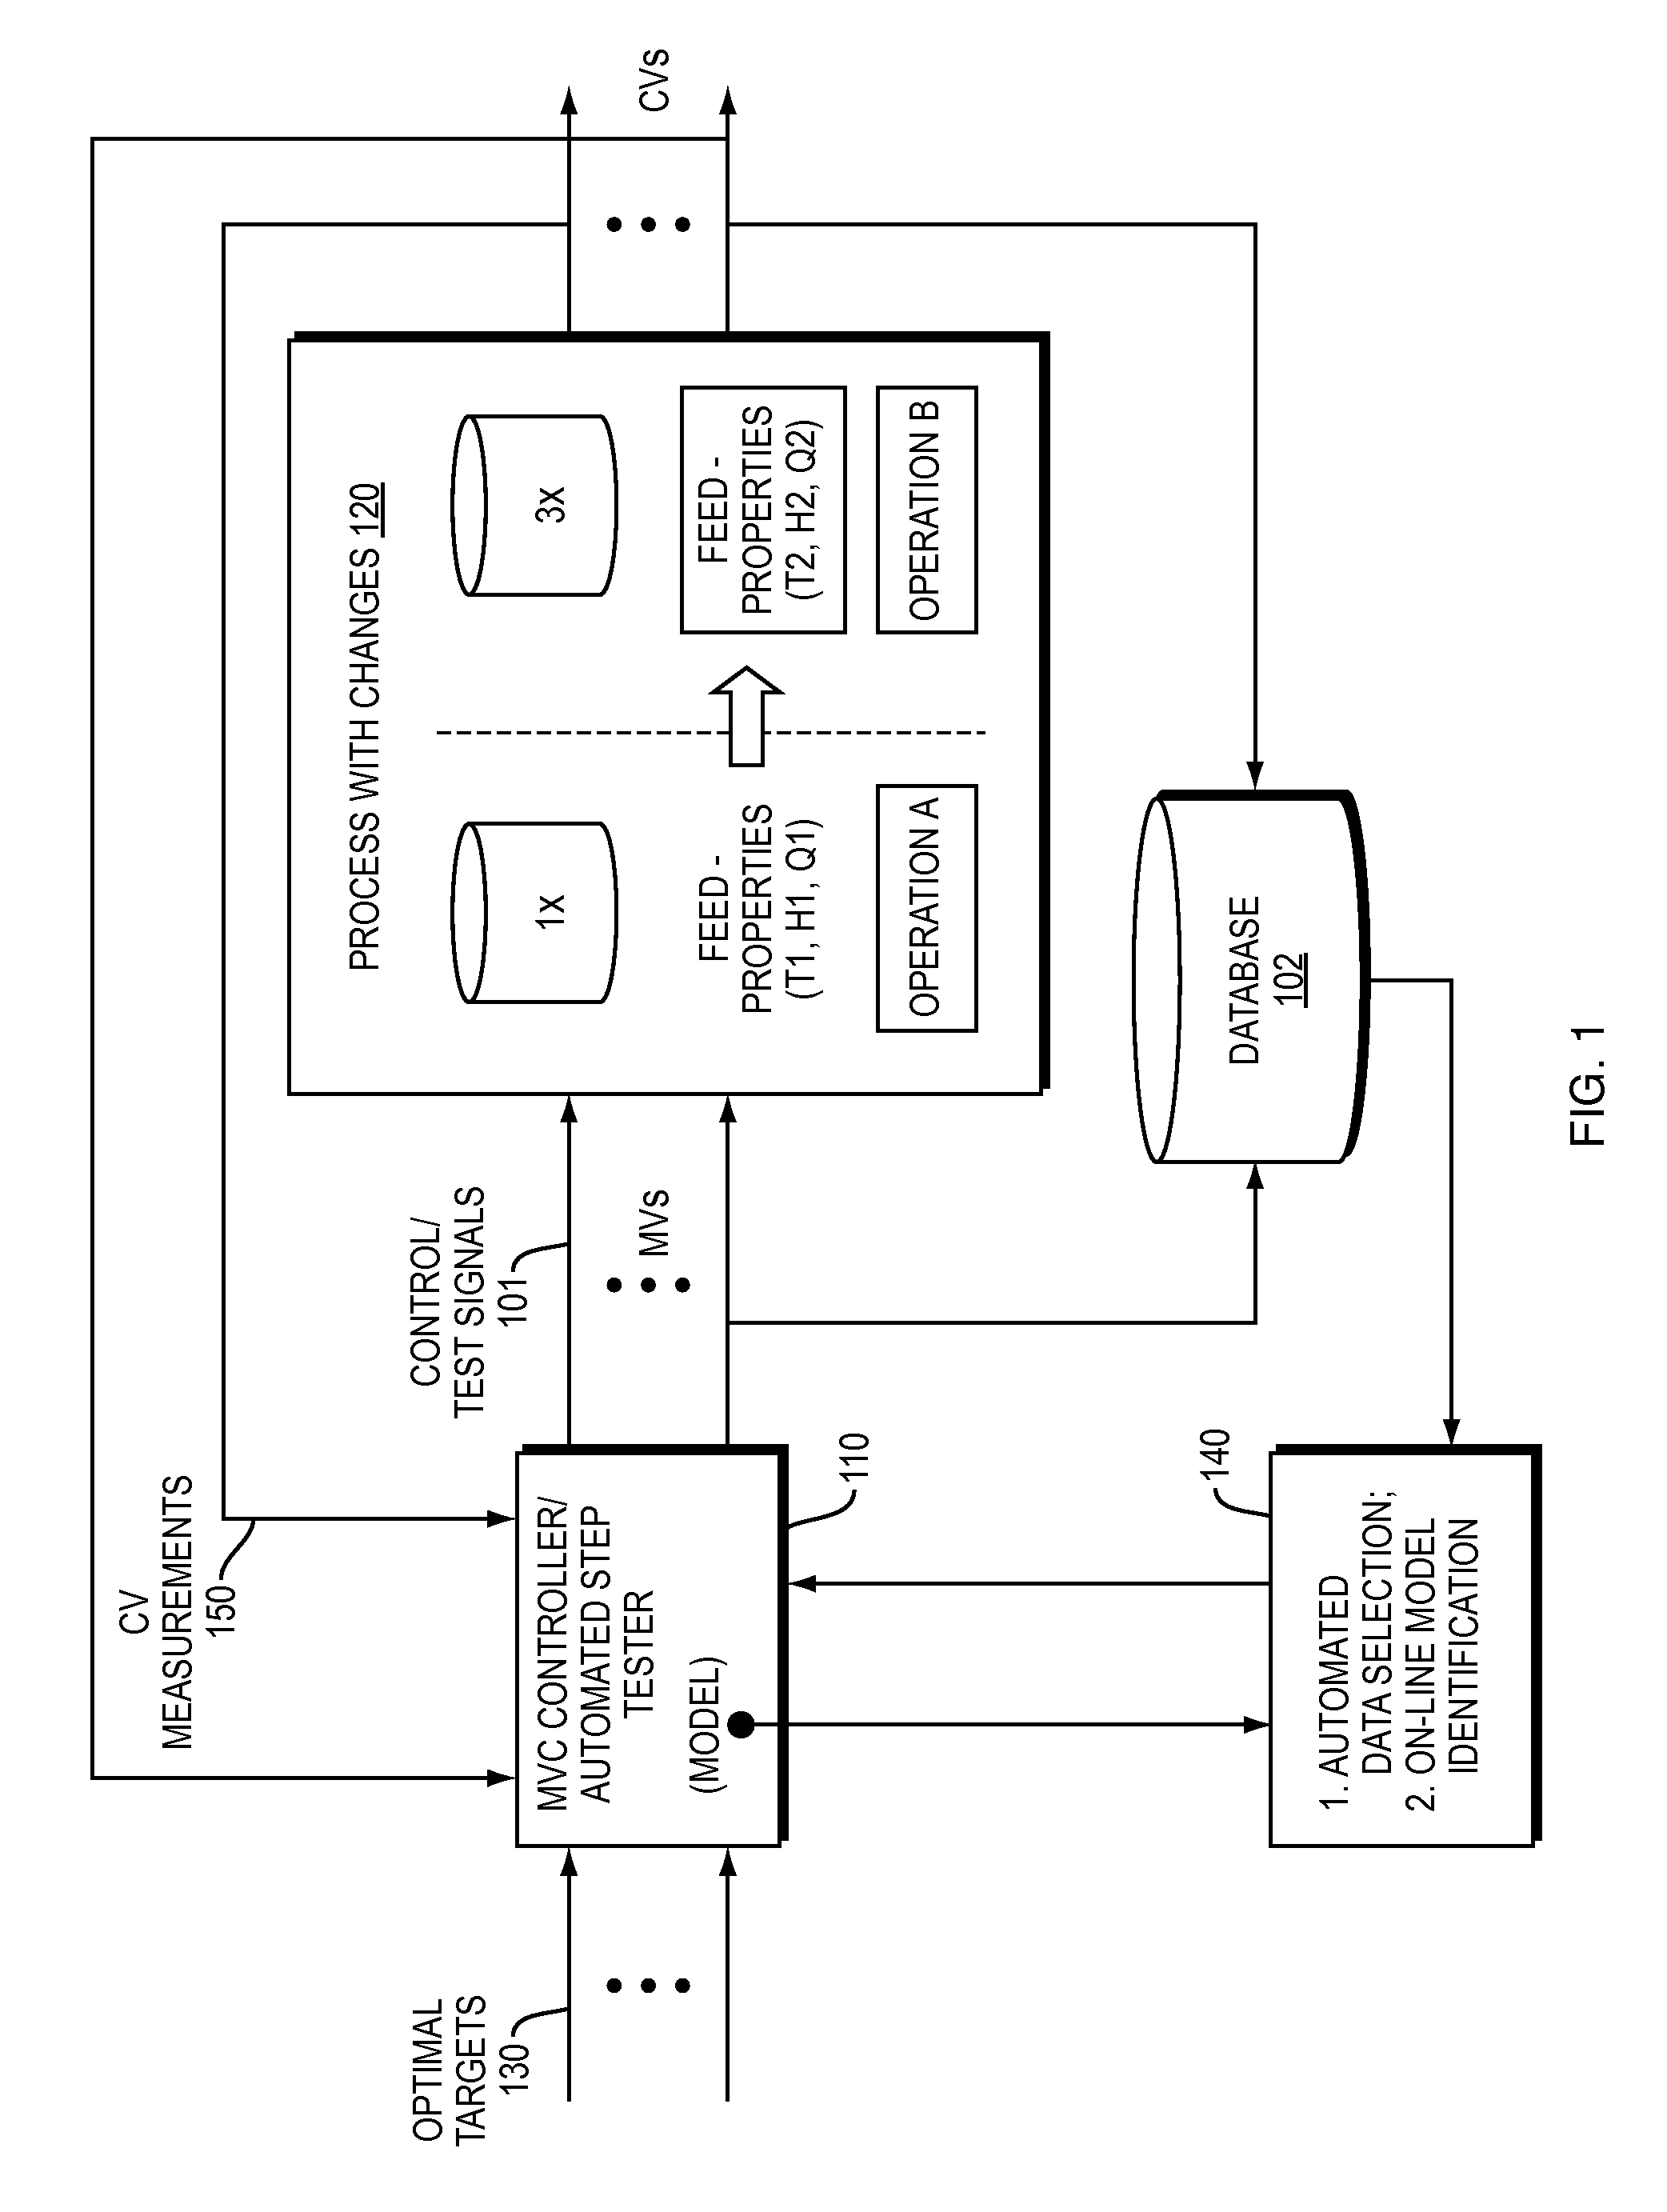 Apparatus and method for automated data selection in model identification and adaptation in multivariable process control